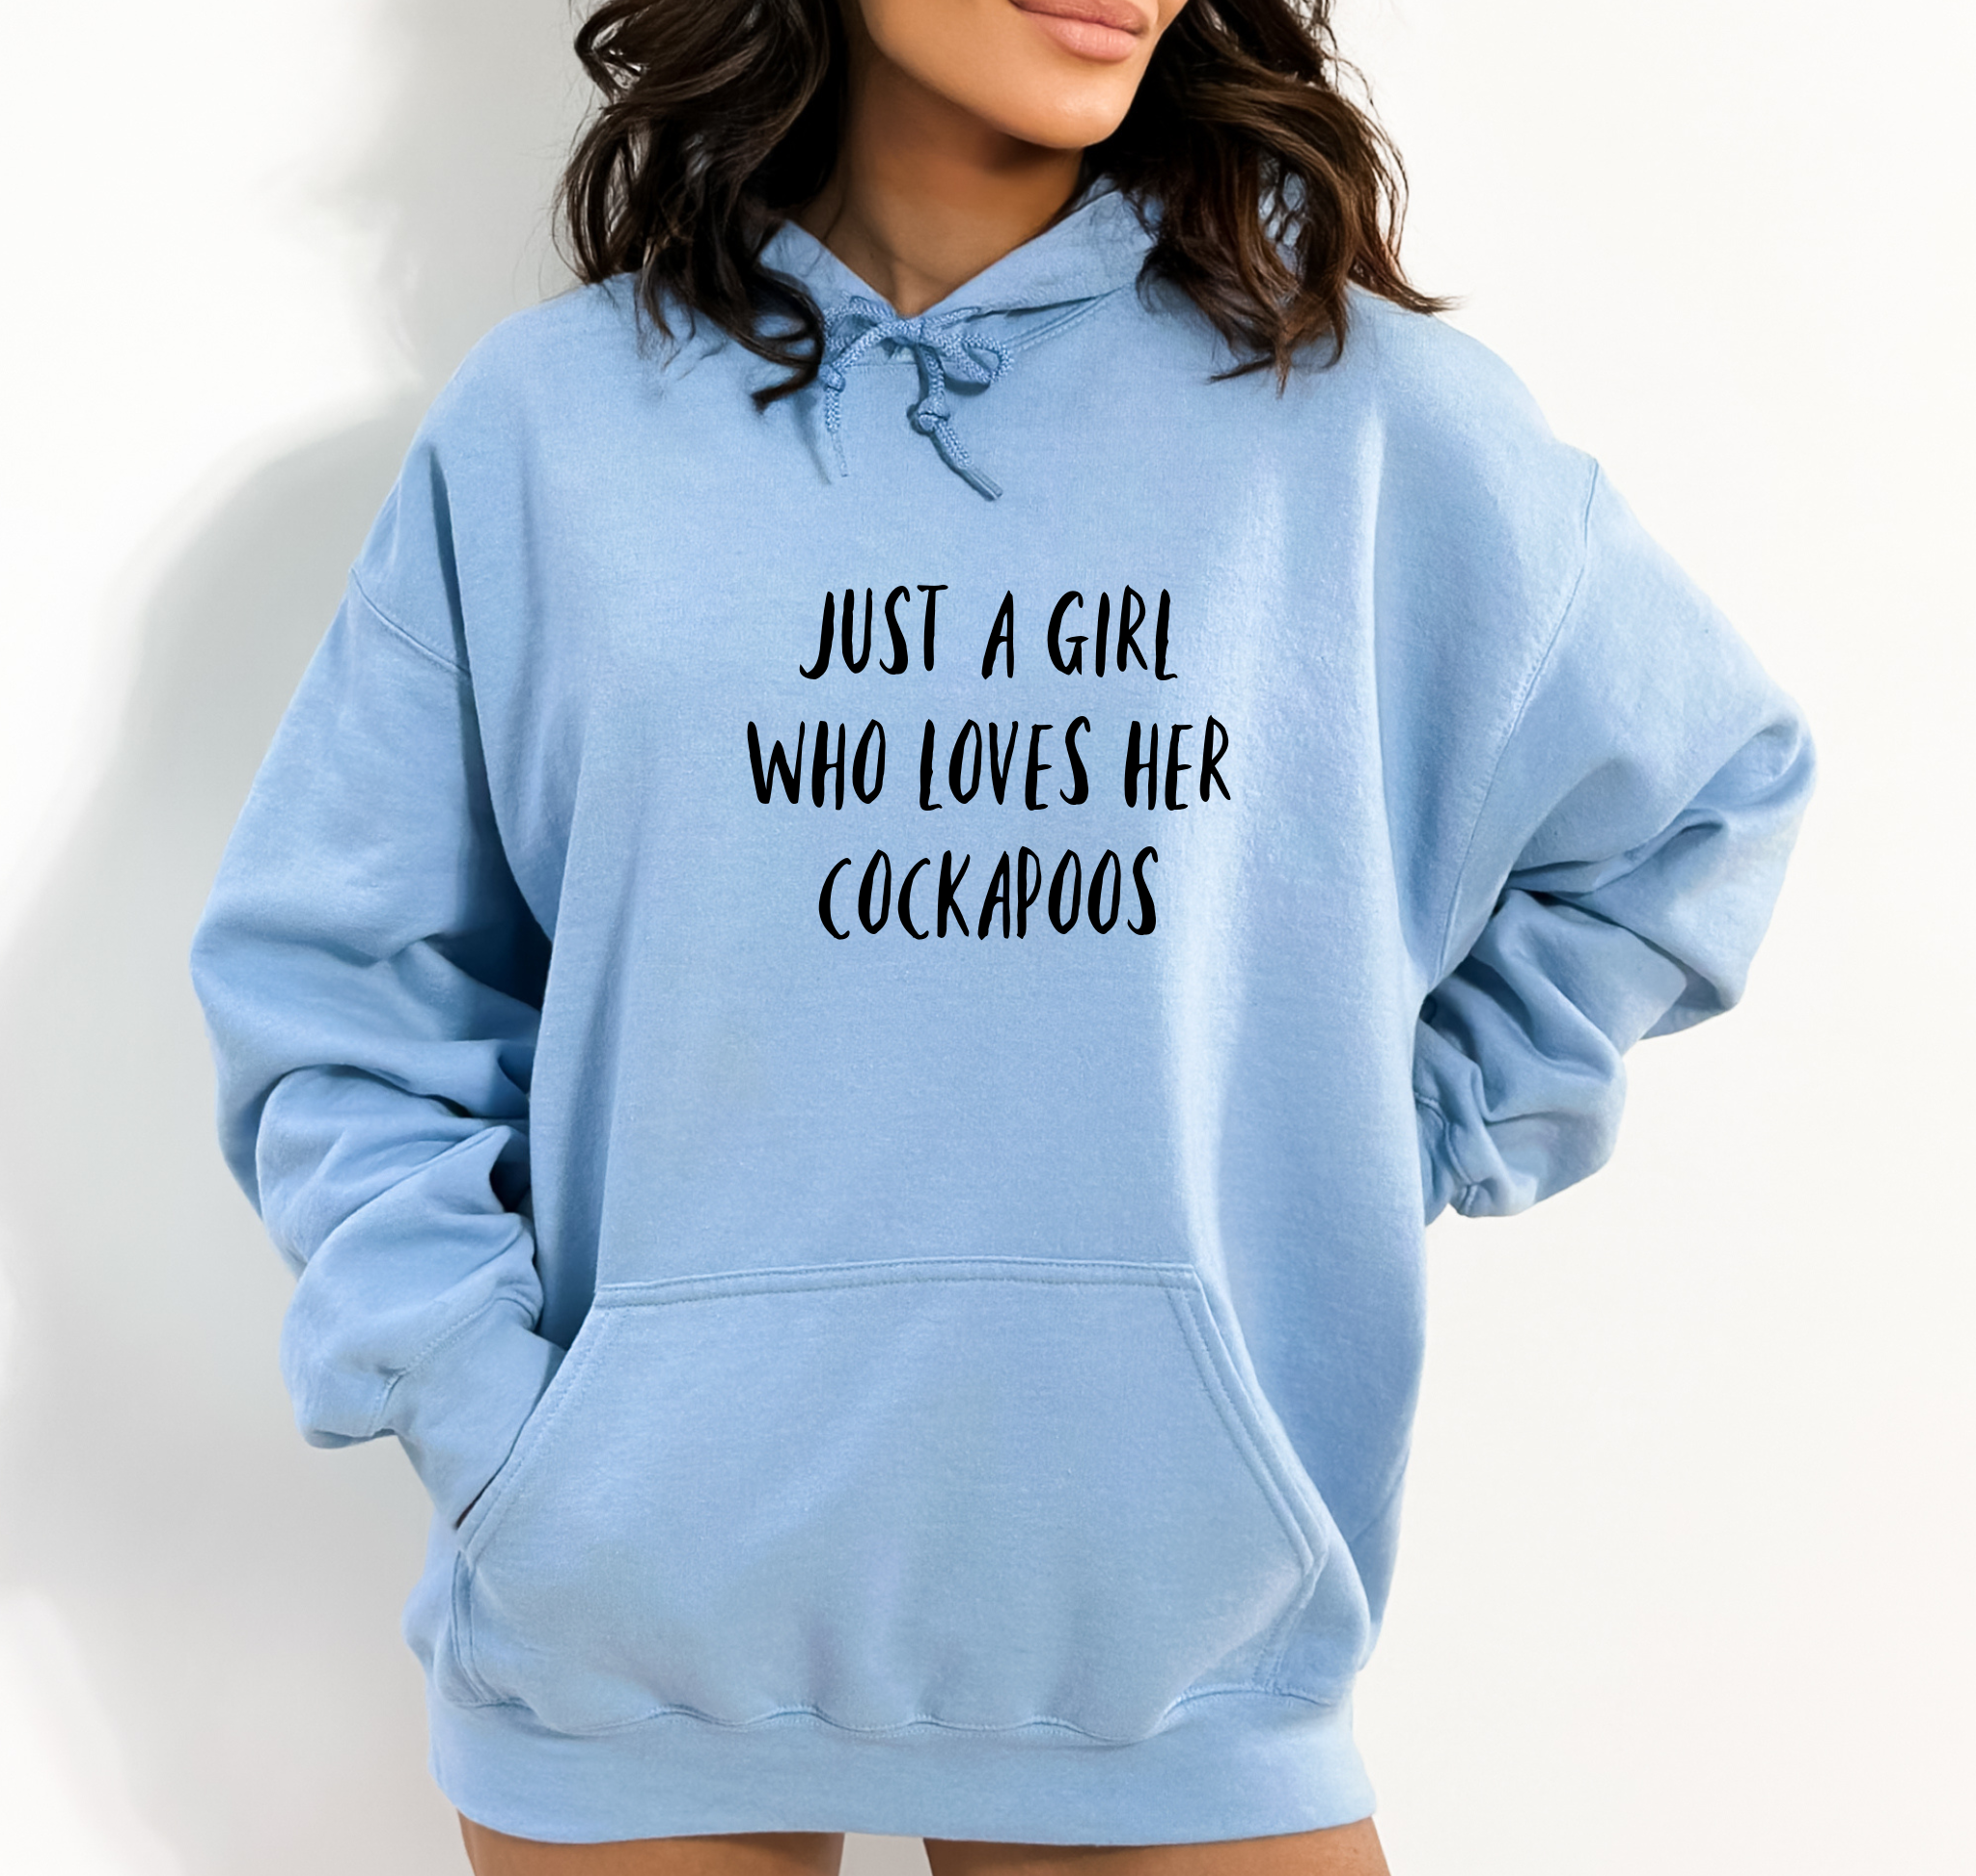 Just a Girl Who Loves Her Cockapoos Hoodie - Sky Blue Size L - UK 16-18 (44")